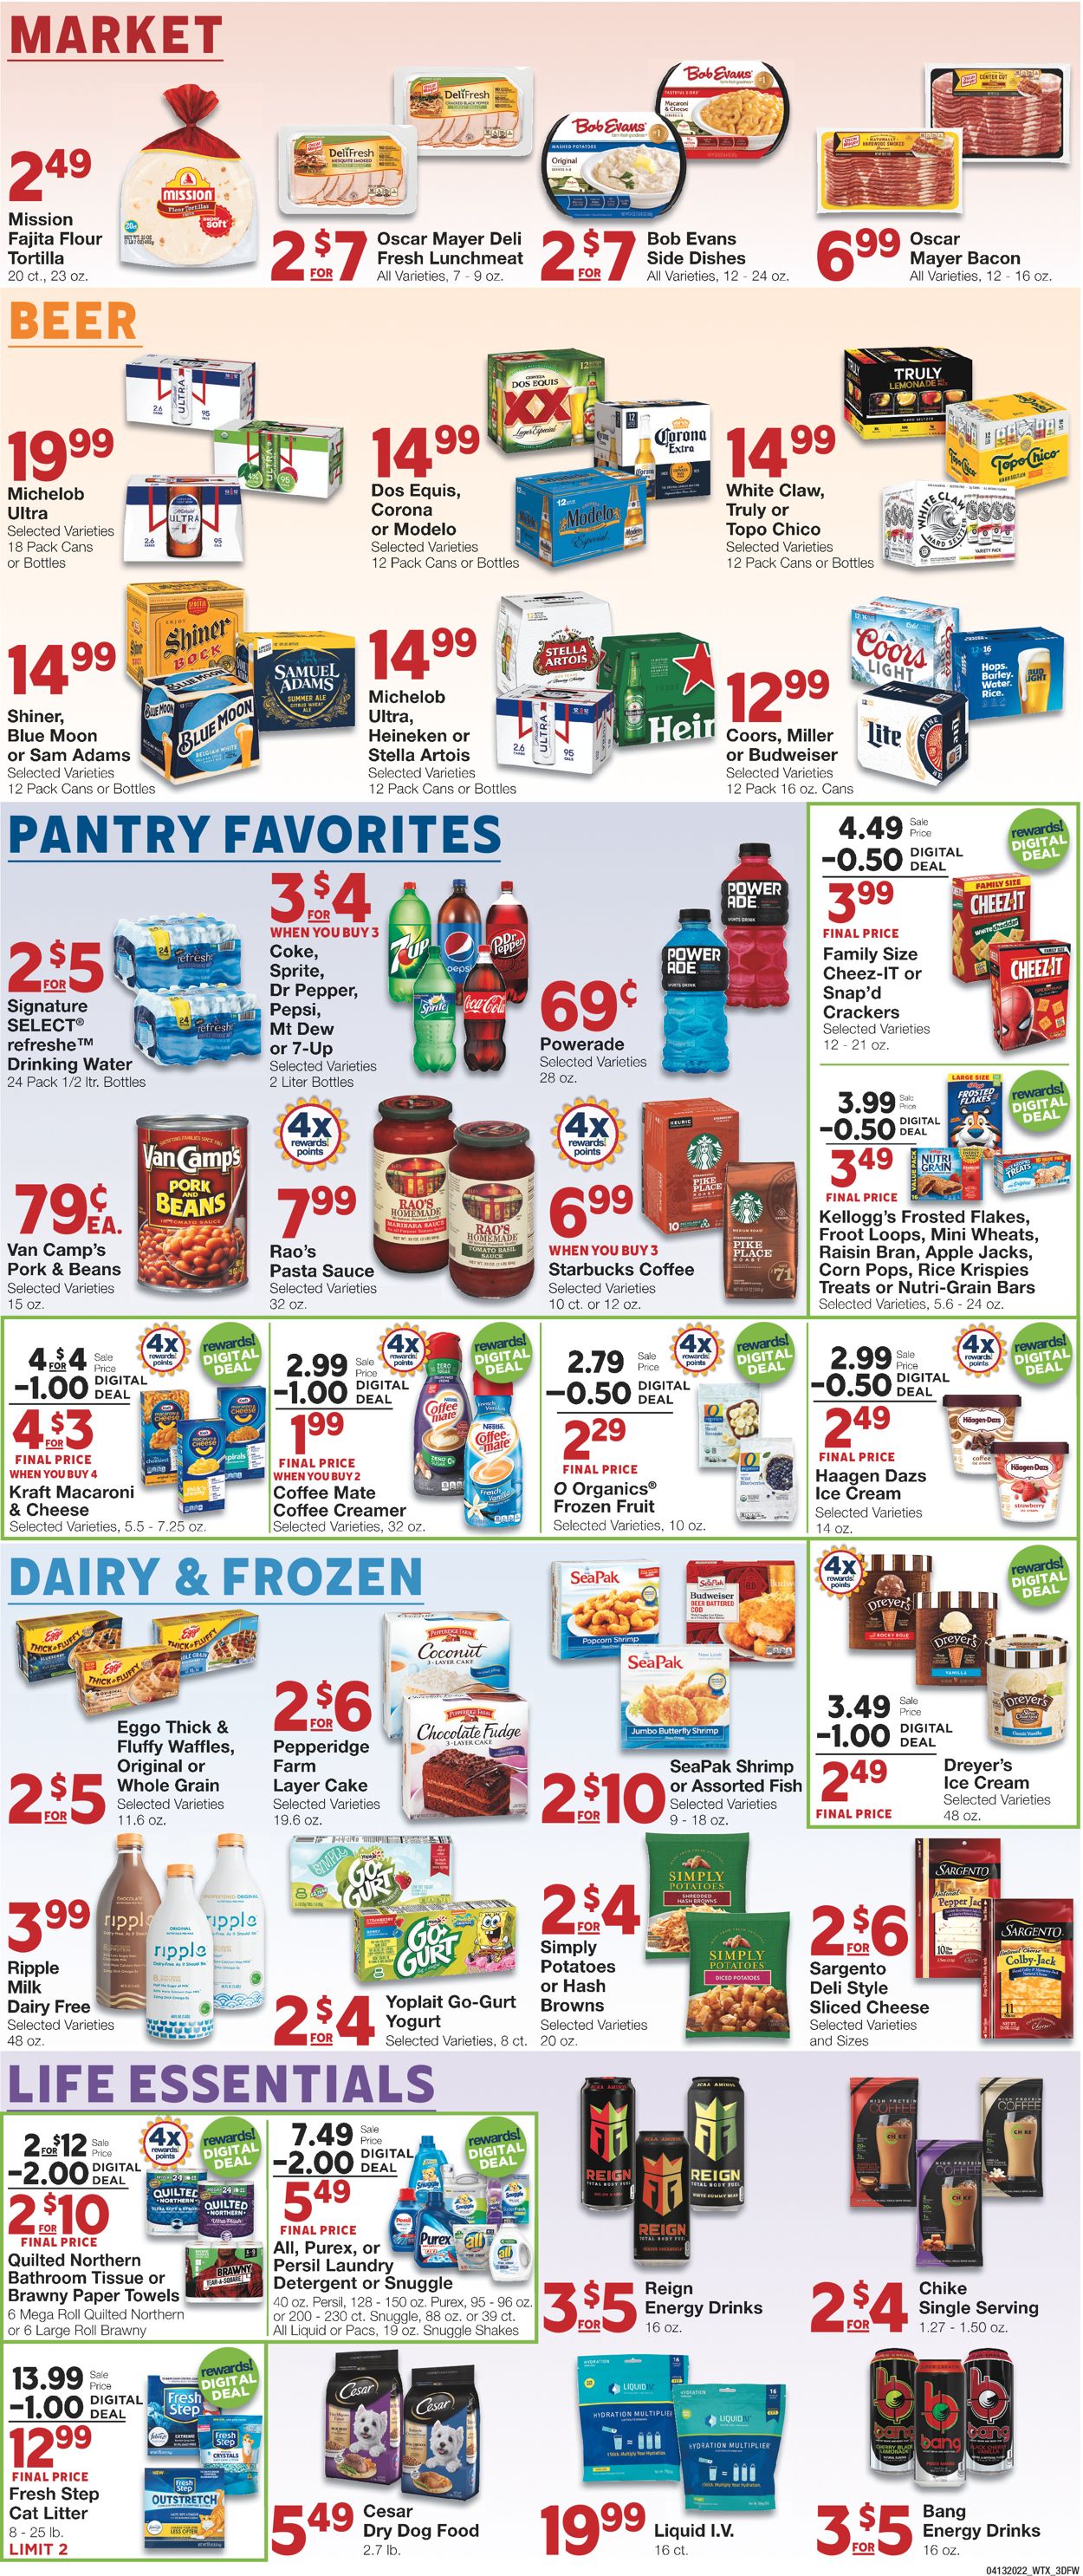 United Supermarkets EASTER AD 2022 Weekly Ad Circular - valid 04/13-04/19/2022 (Page 3)